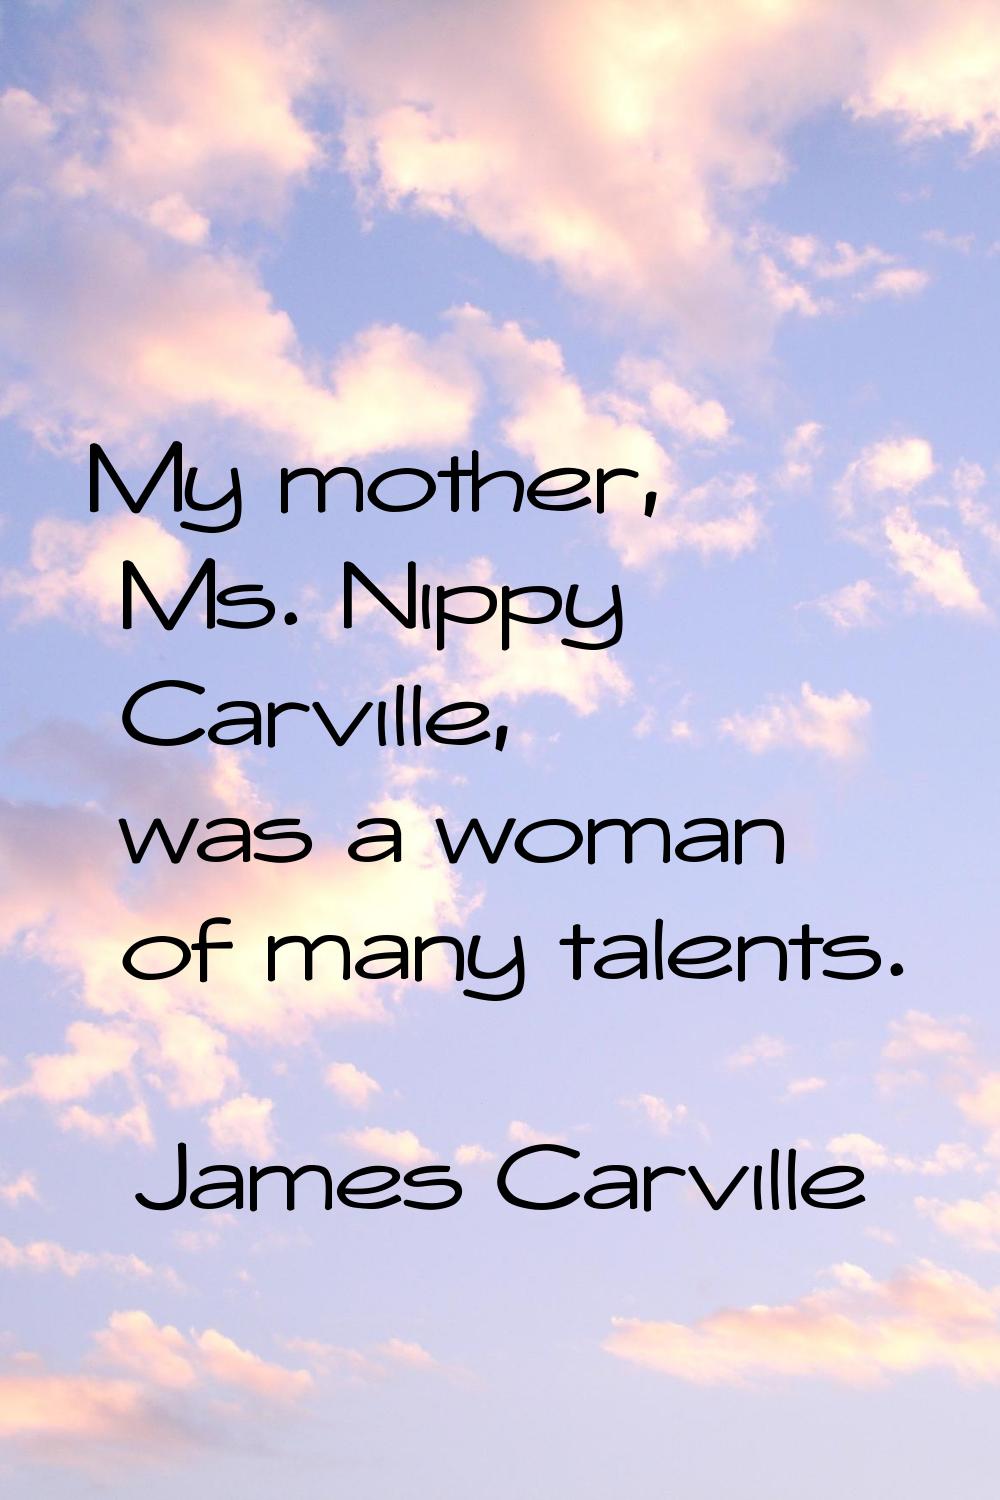 My mother, Ms. Nippy Carville, was a woman of many talents.